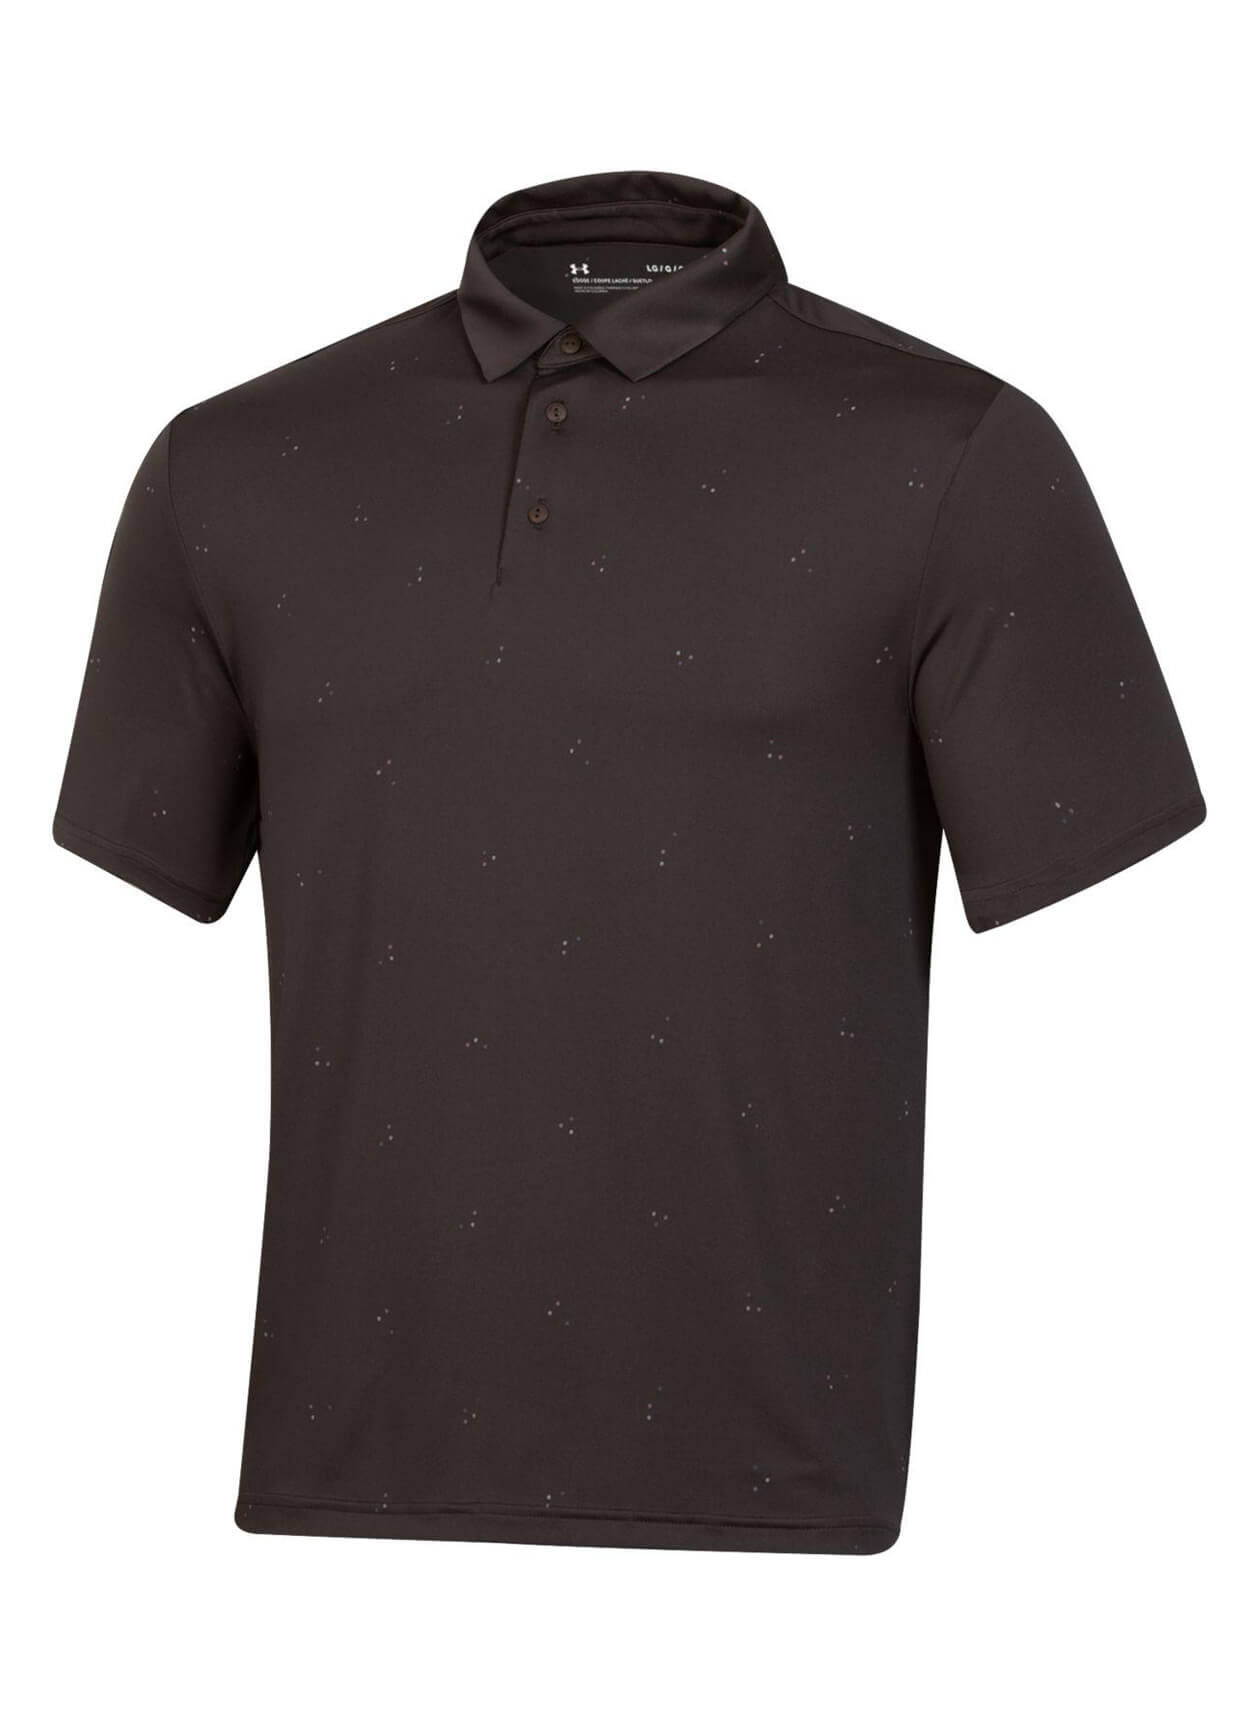 Under Armour UM0937 - Men's Playoff 3.0 Scatter Print Polo